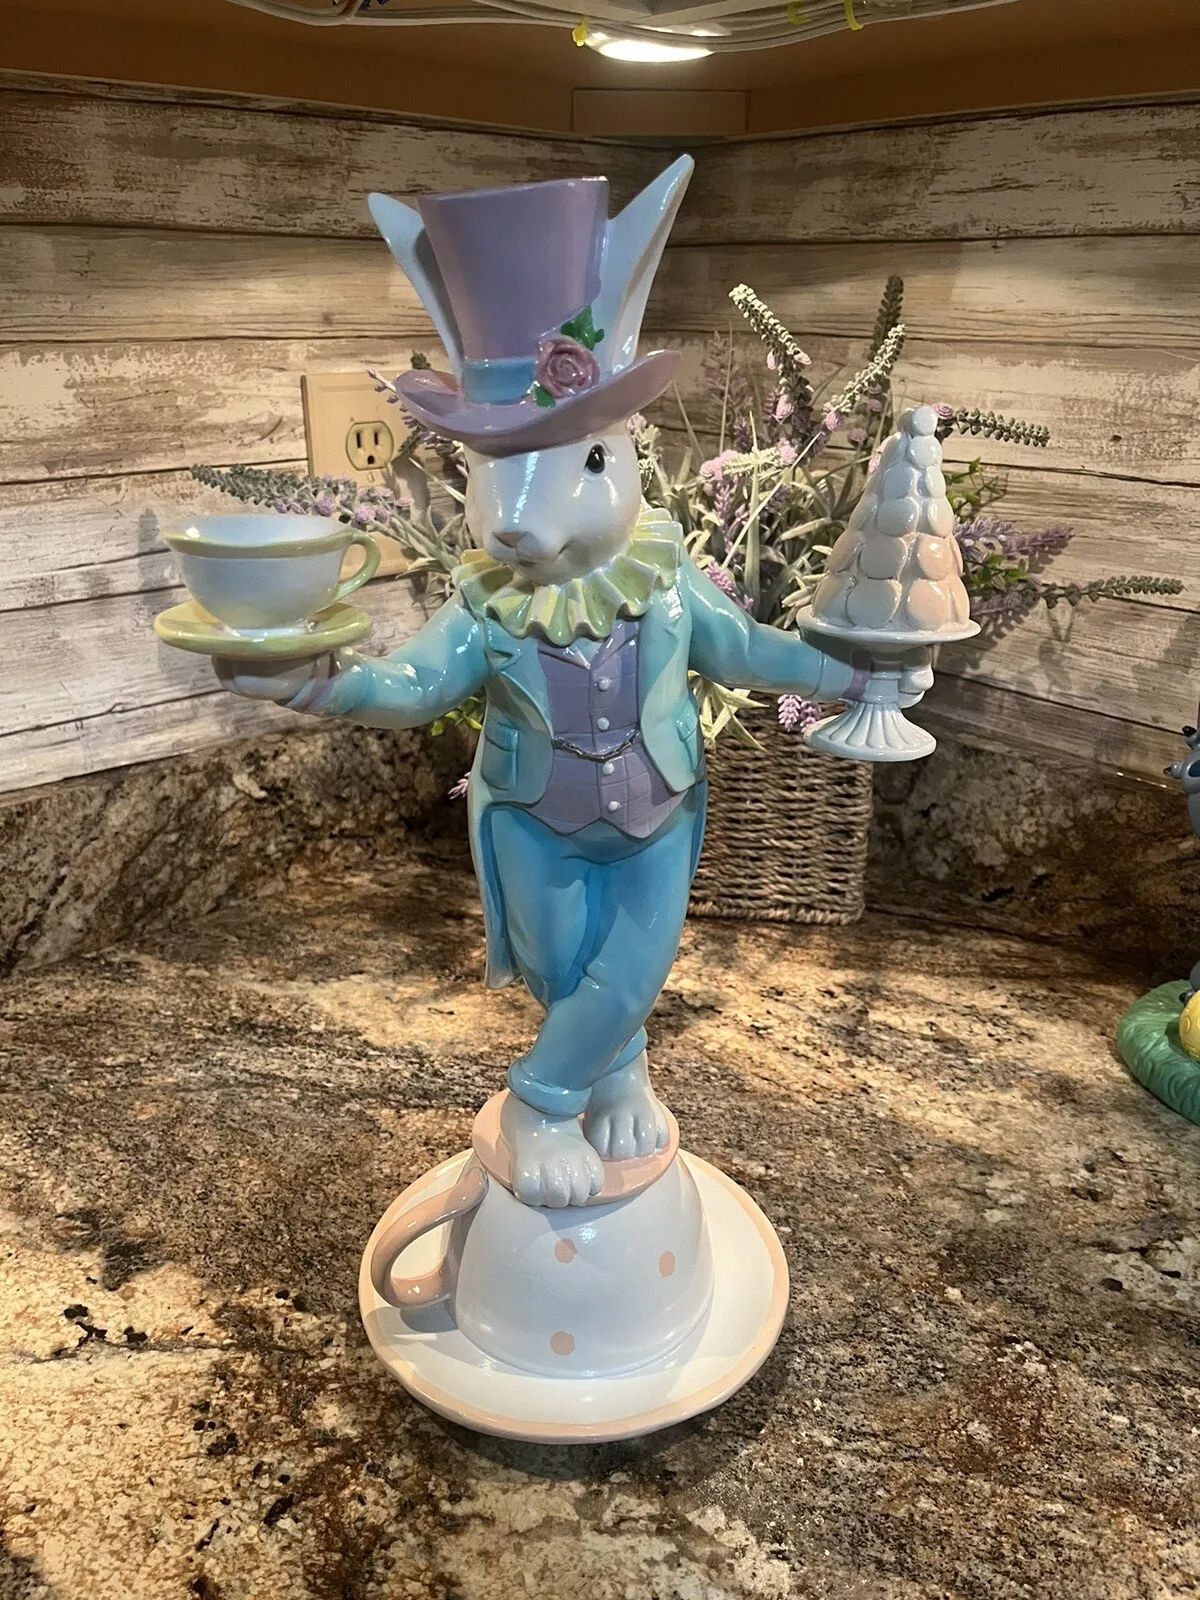 Cottontail Lane Mad Hatter Easter Bunny 24" Figure Macaroon Tree and Tea Cups  | eBay | eBay US